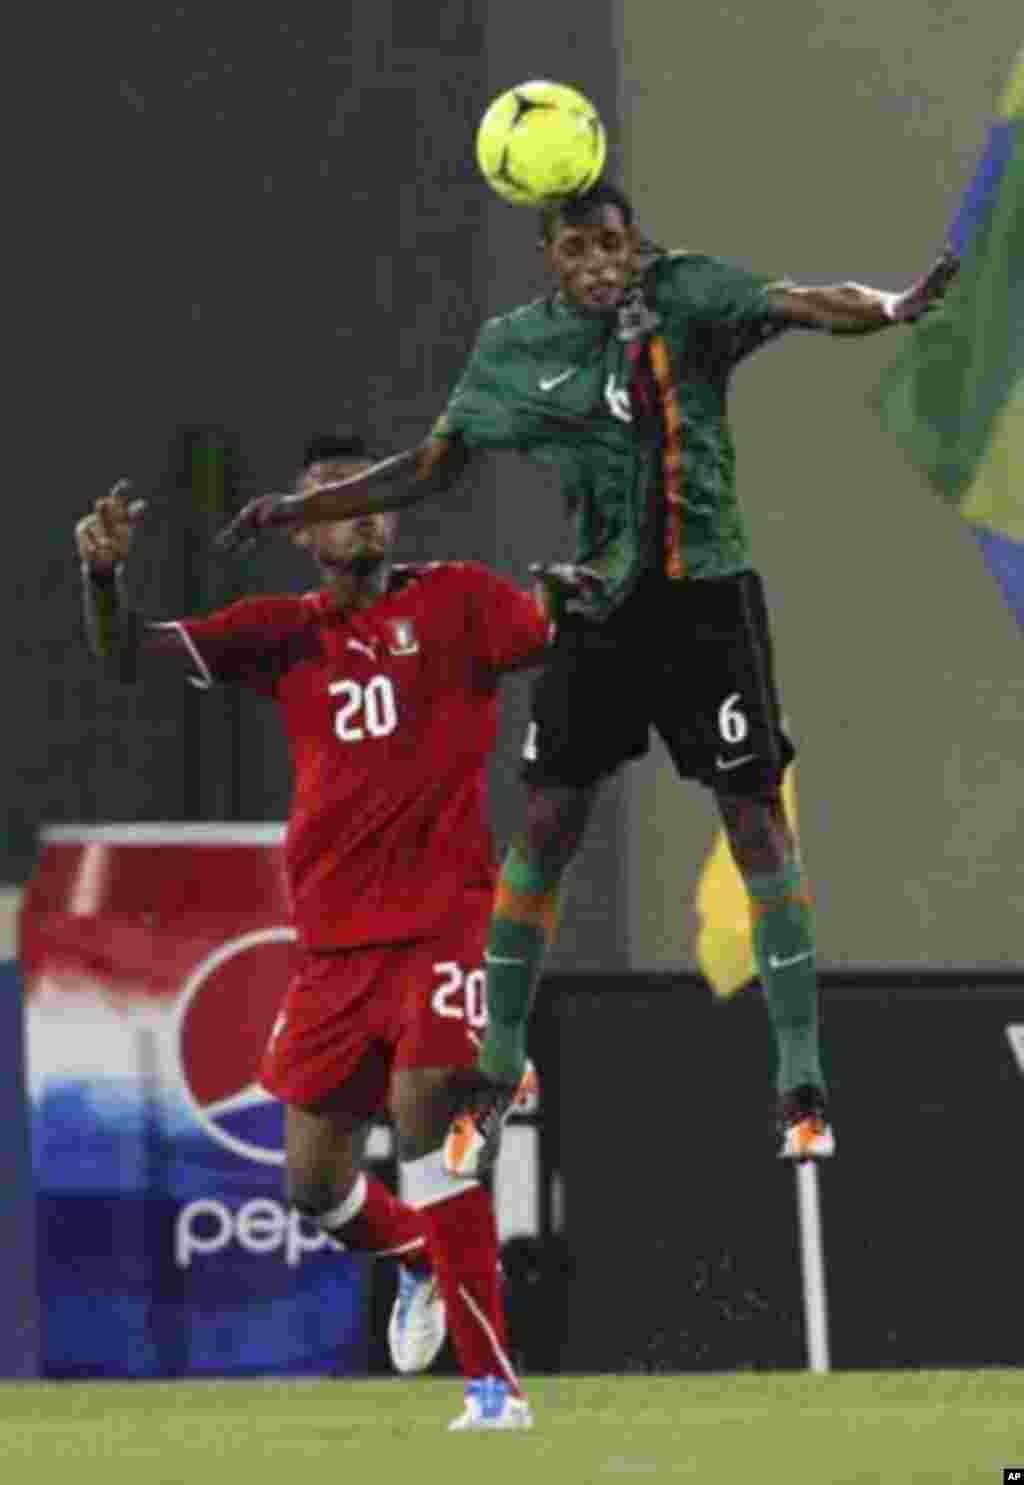 Bladmir Ekoedo (L) of Equatorial Guinea fights for the ball with Davies Nkausu of Zambia during their African Nations Cup soccer match in Malabo January 29, 2012.